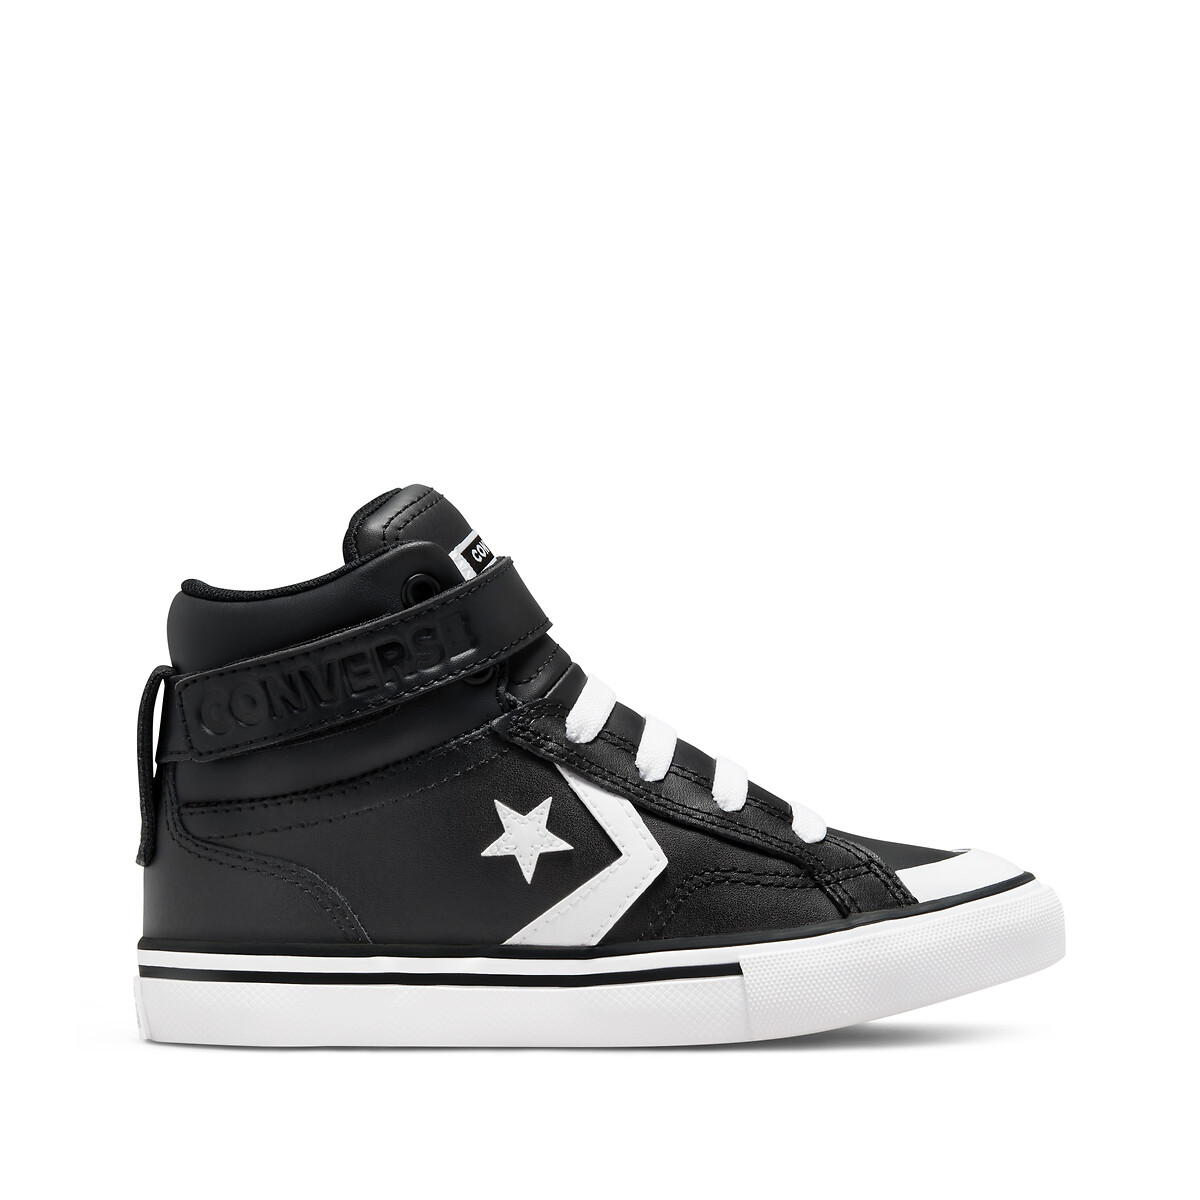 Image of Kids Pro Blaze Foundational Leather High Top Trainers